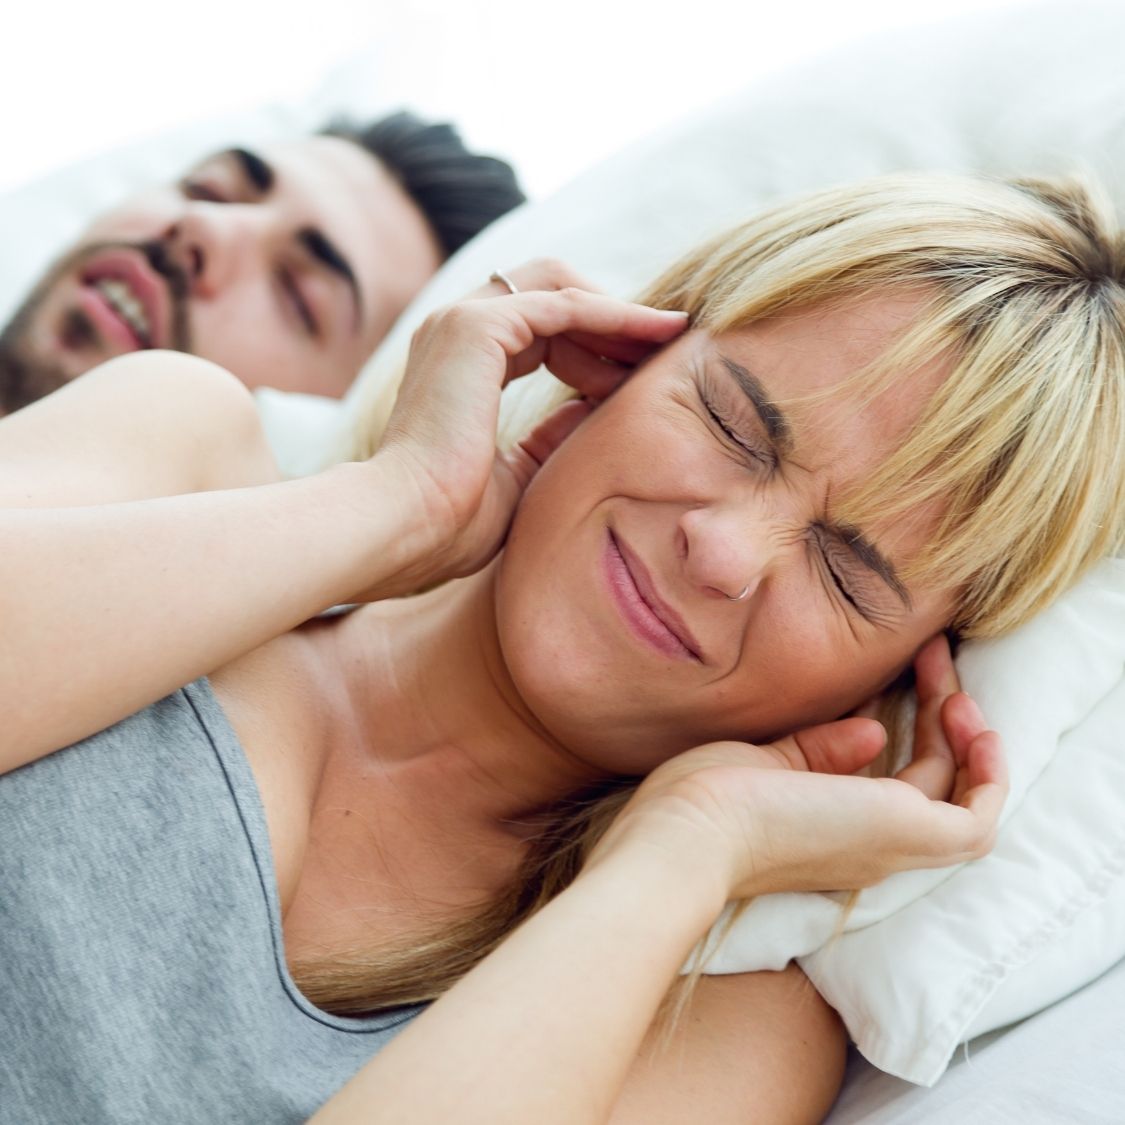 Have a Snoring Partner? Here Are 4 Tips for Quieter Sleep